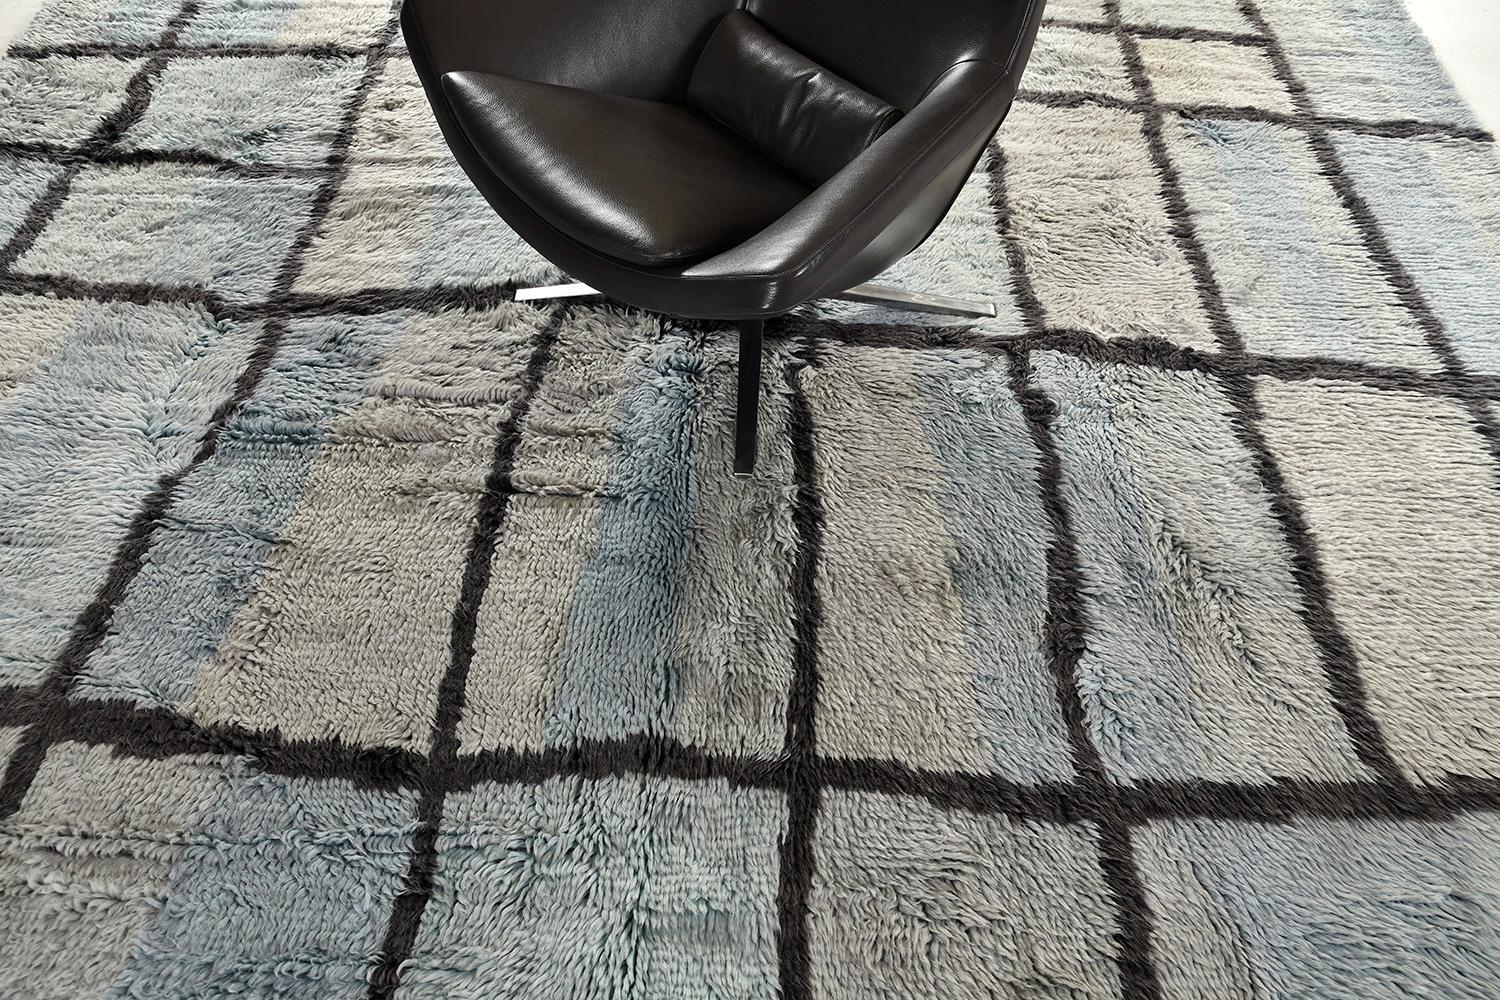 Bahja is an elegant hand-spun wool shag that features a solid irregular squared pattern over blue and gray schemes. Impressive tassels are woven with a grace that makes the pattern more interesting. A perfect masterpiece for the modern